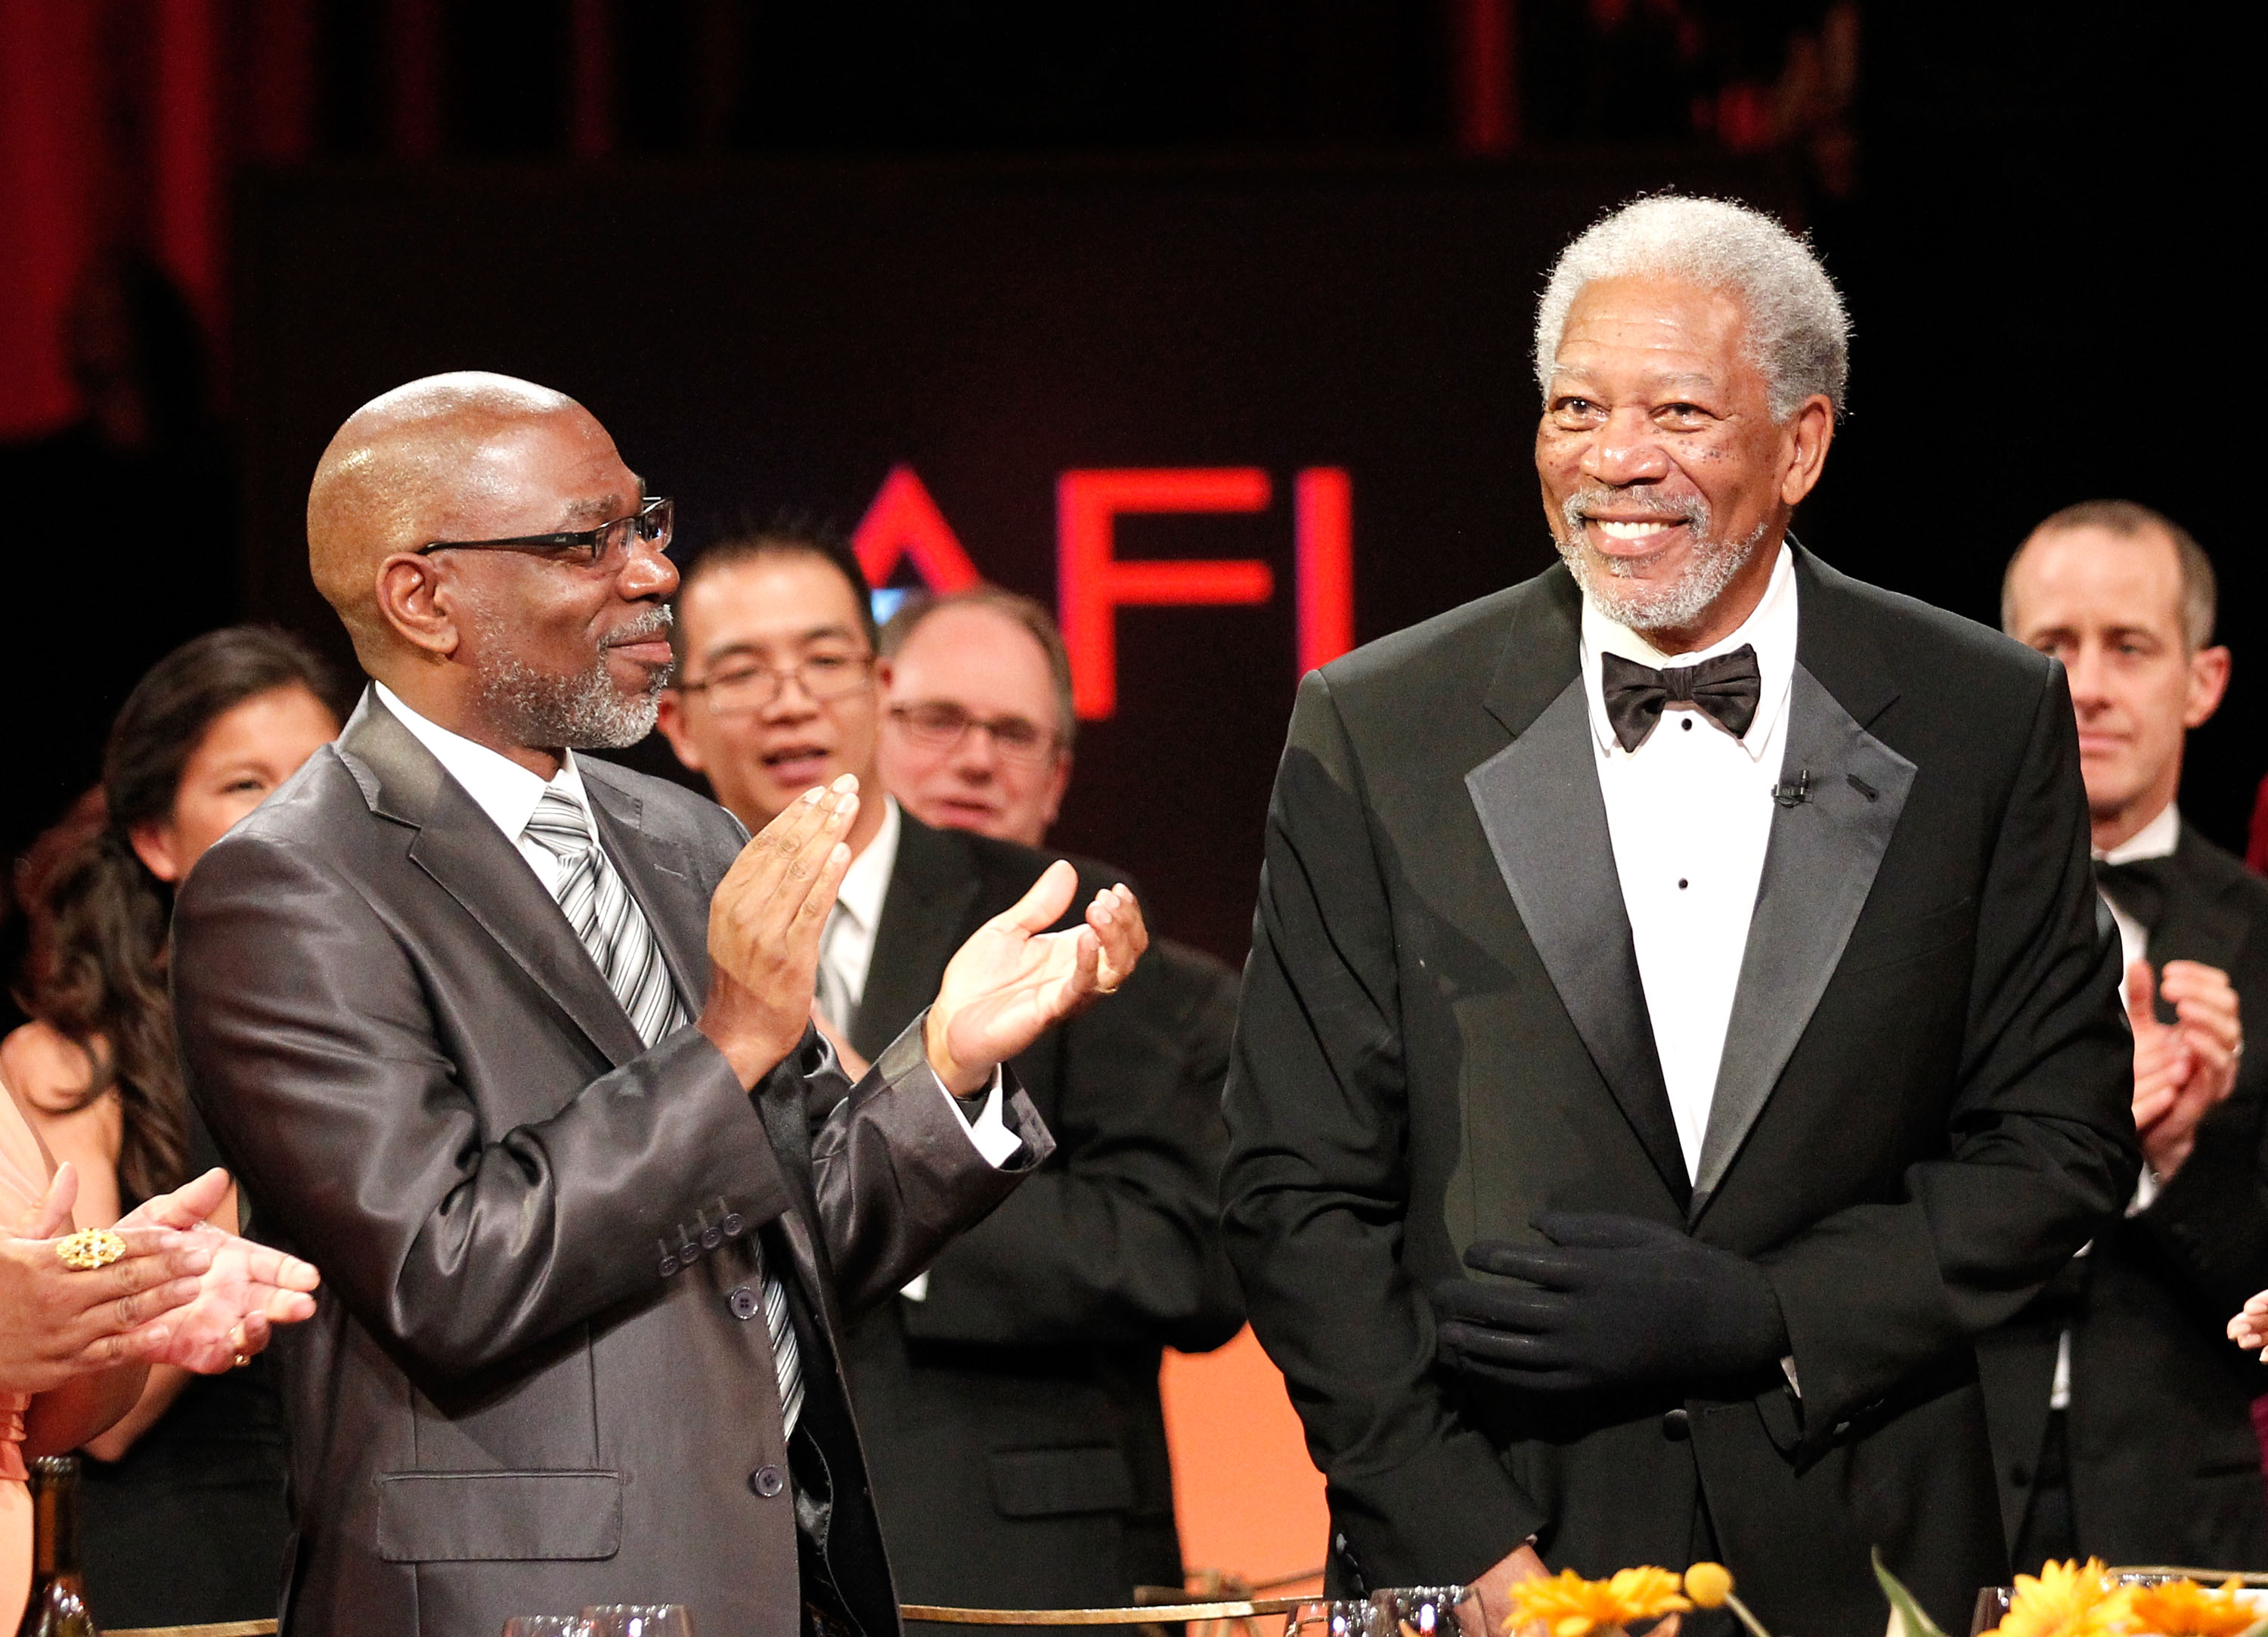 Alfonso and Morgan Freeman at the 39th AFI Life Achievement Awards in Culver City, California on June 9, 2011 | Source: Getty Images